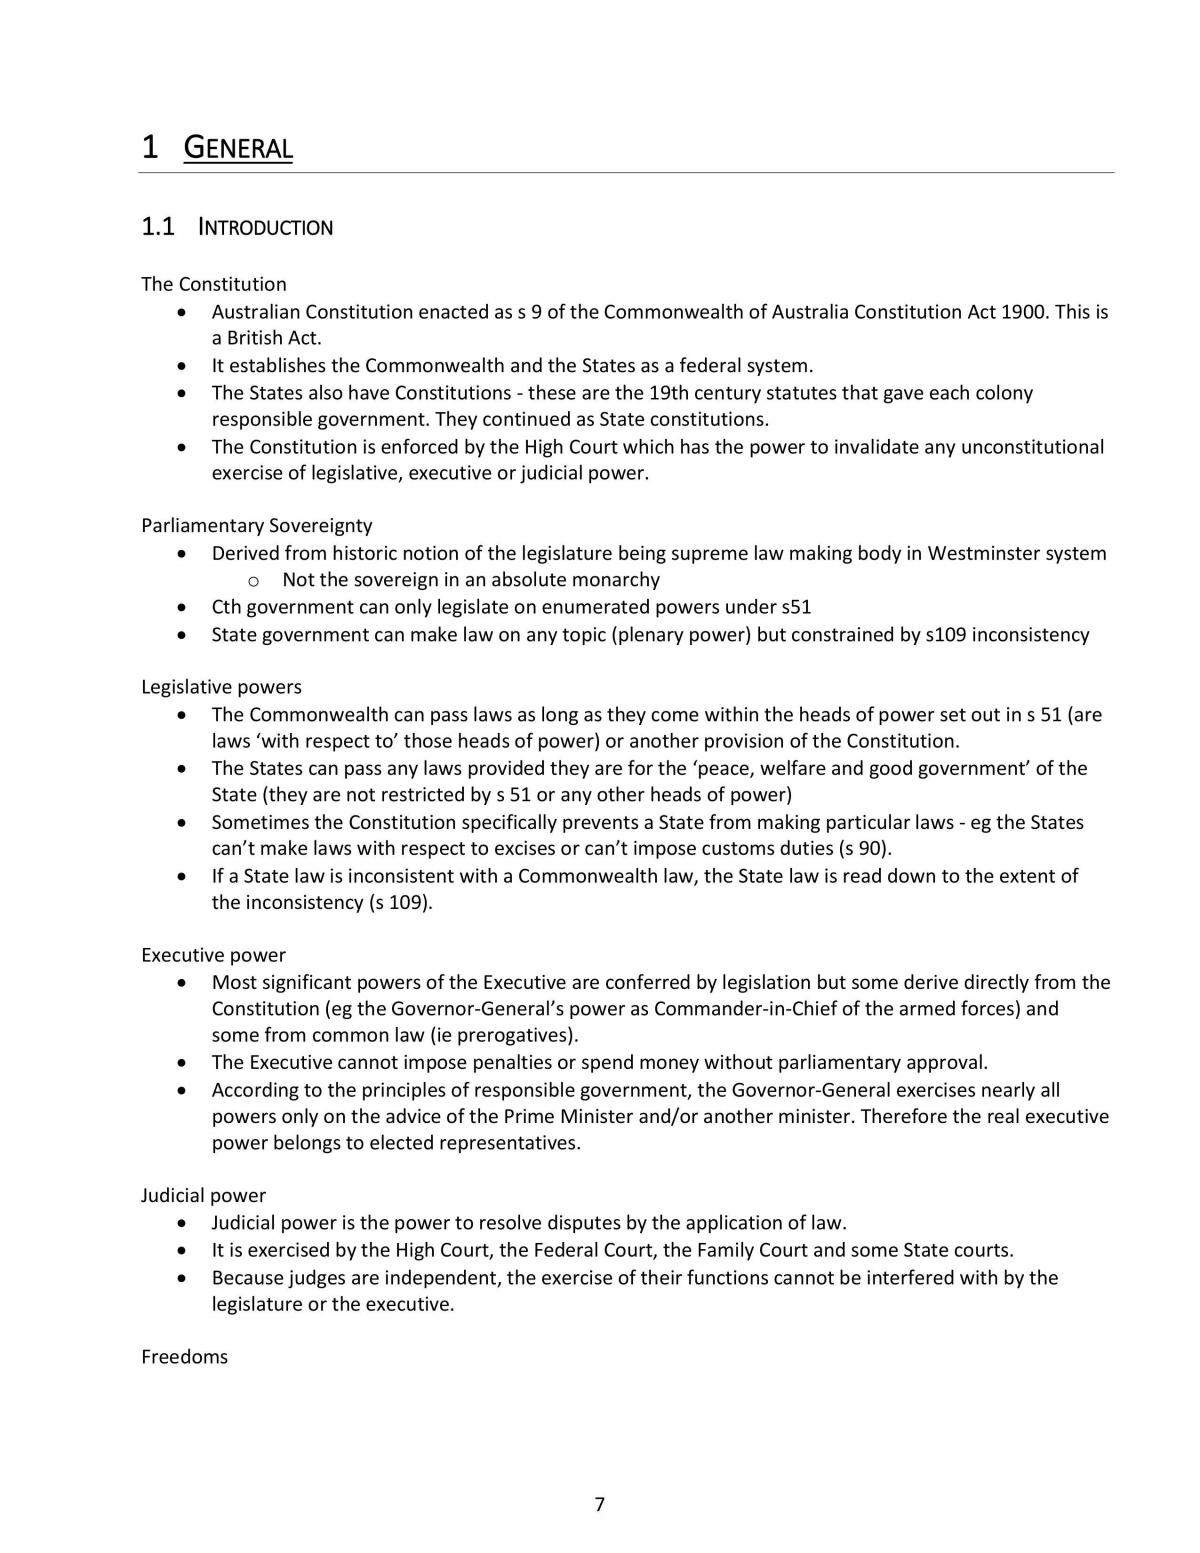 Australian Constitutional Law Notes - Page 7